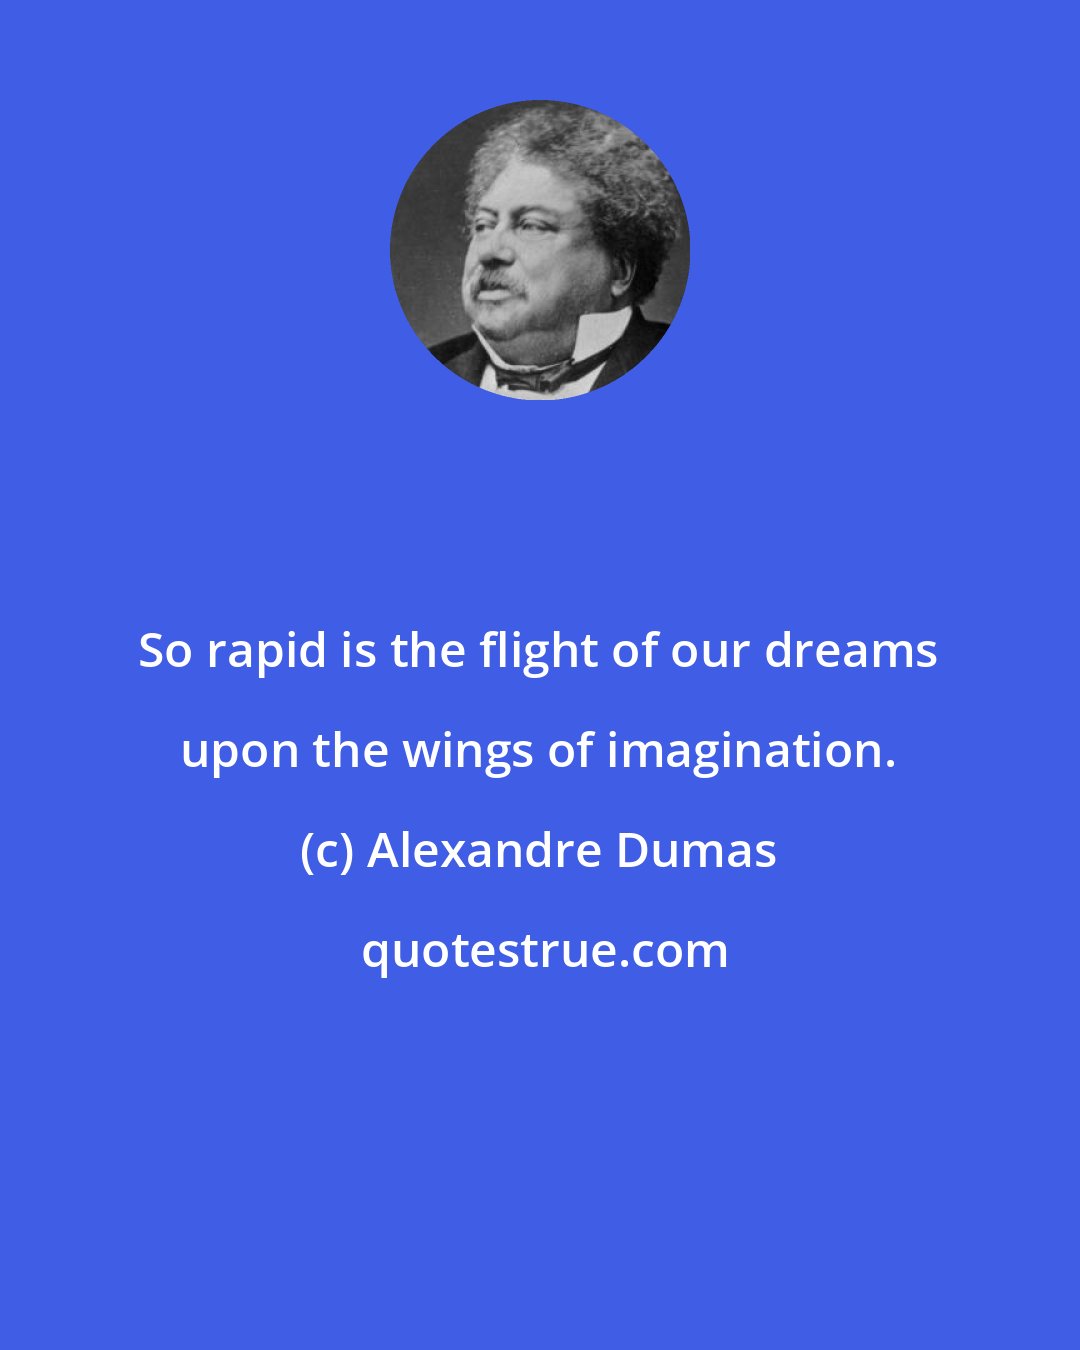 Alexandre Dumas: So rapid is the flight of our dreams upon the wings of imagination.